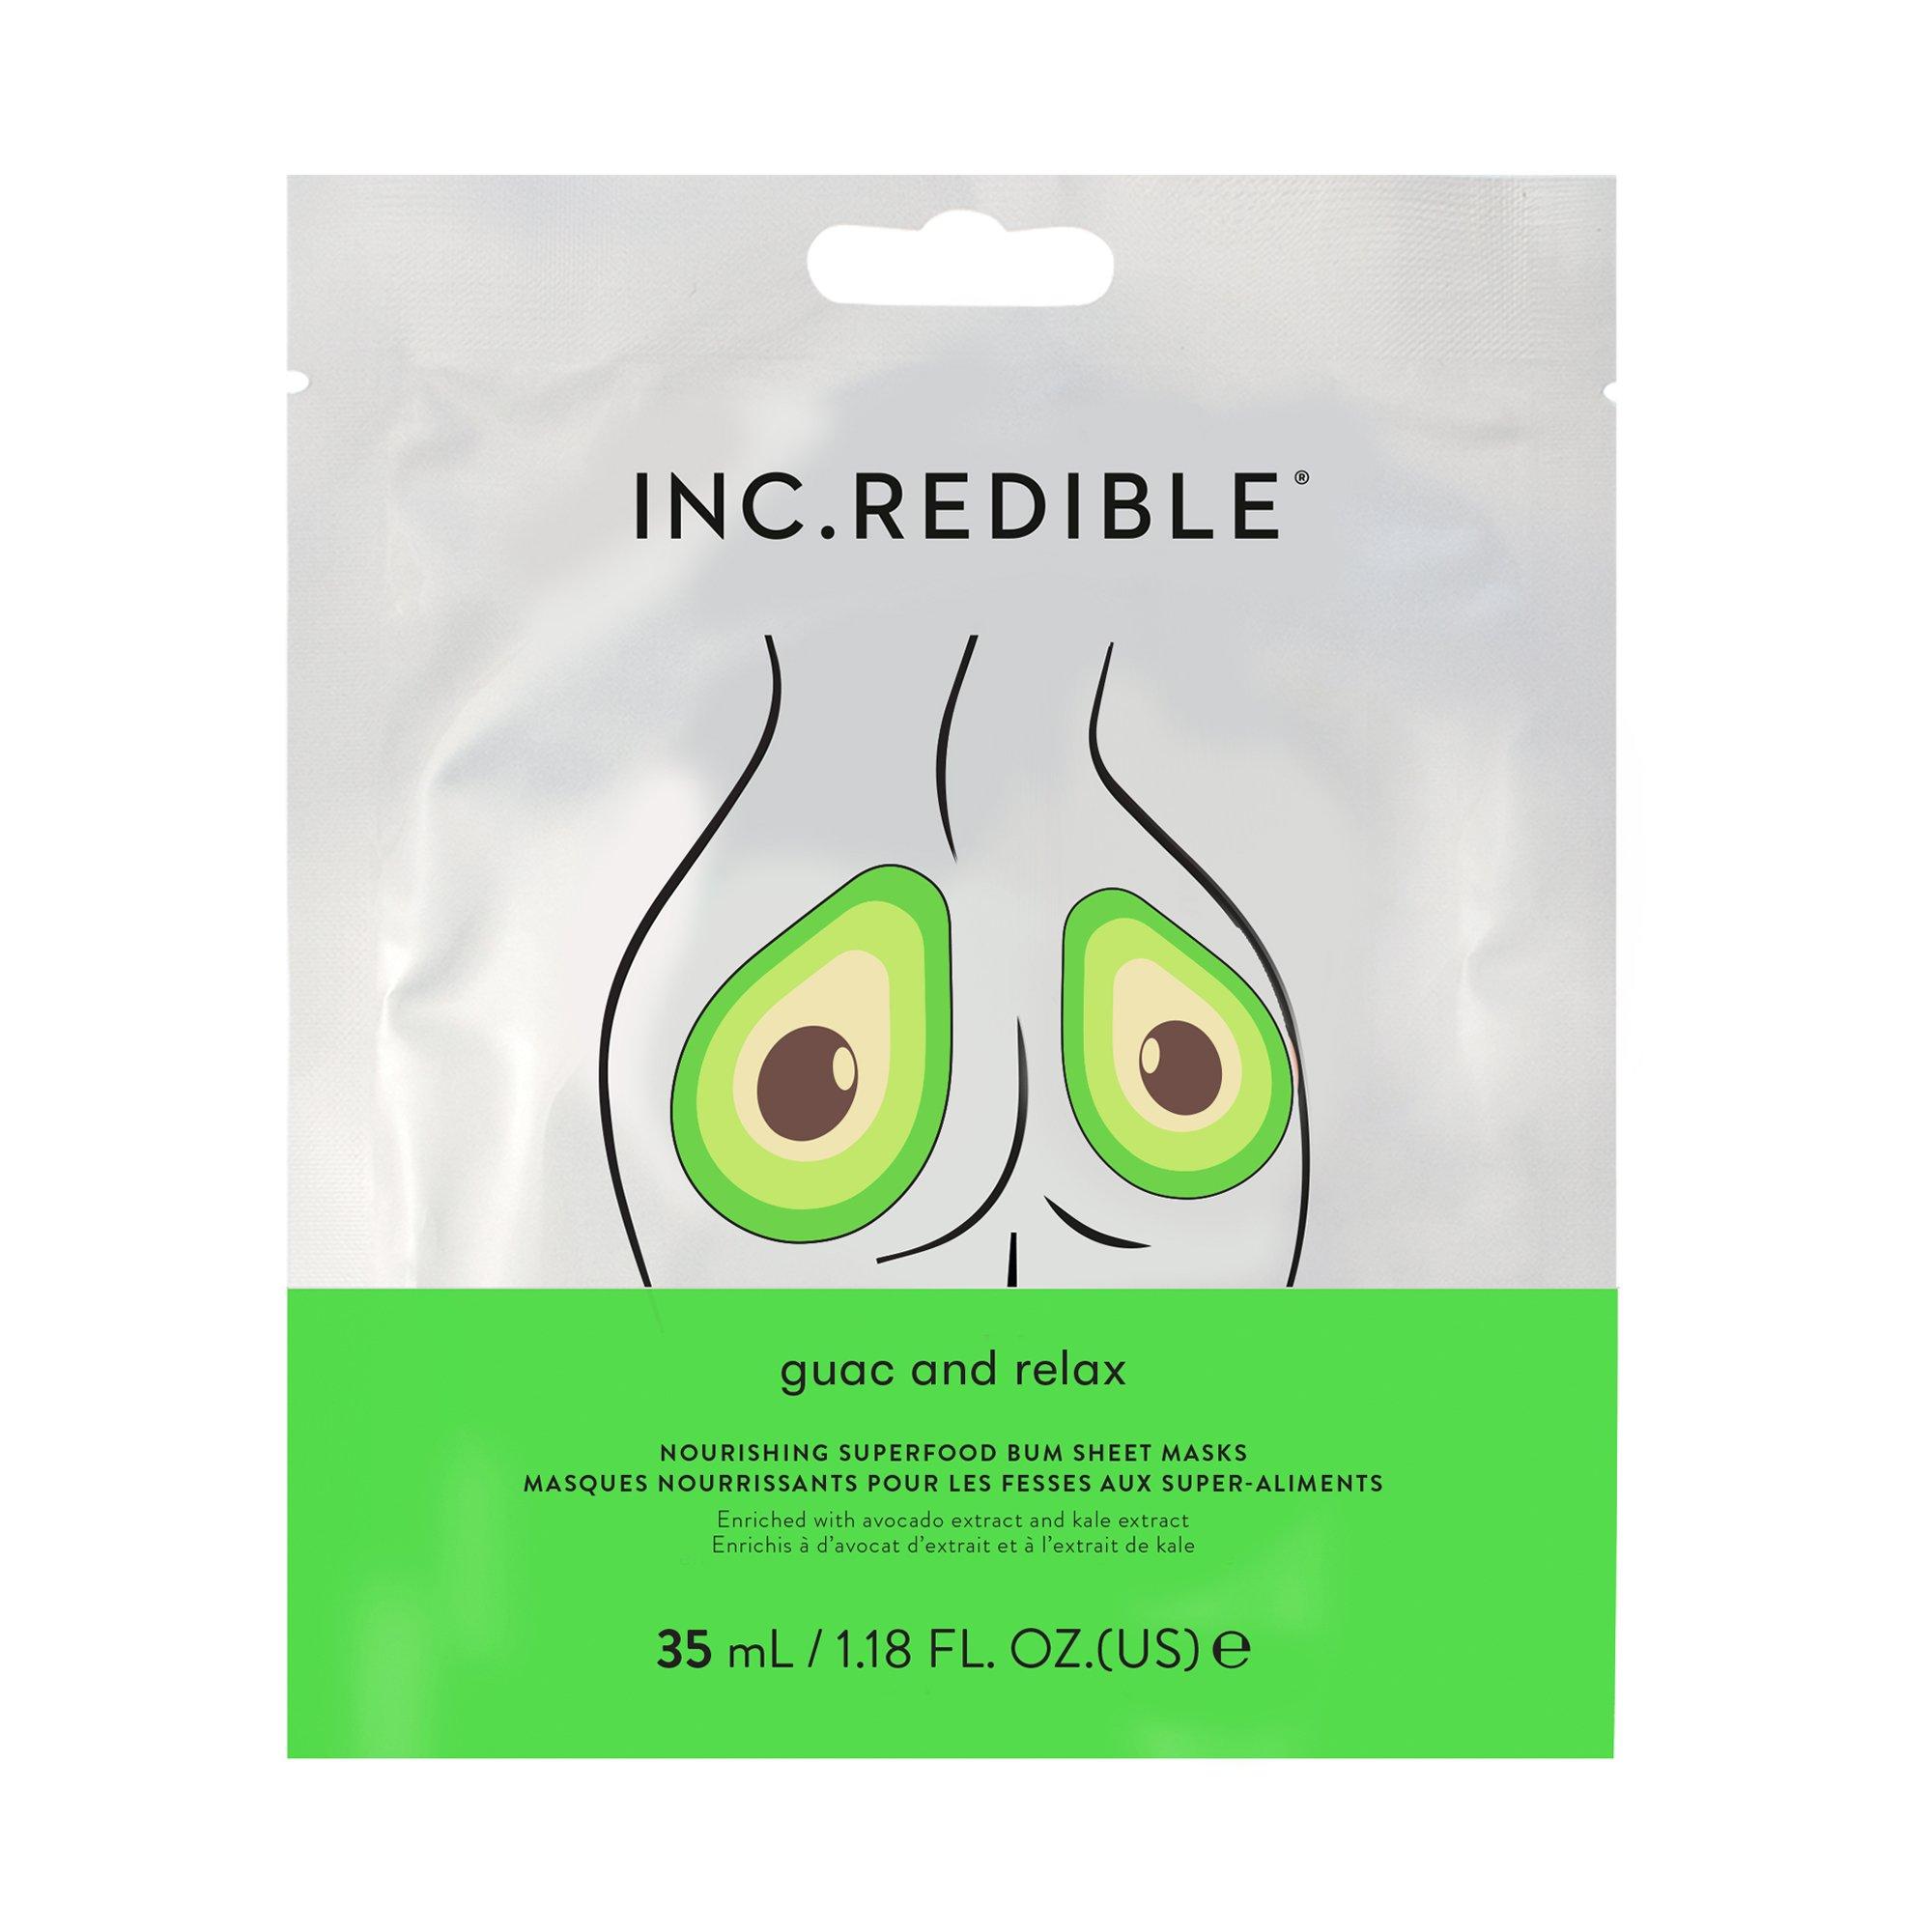 Inc.redible INC.redible Guac and Relax Bum Guac And Relax Bum Mask 